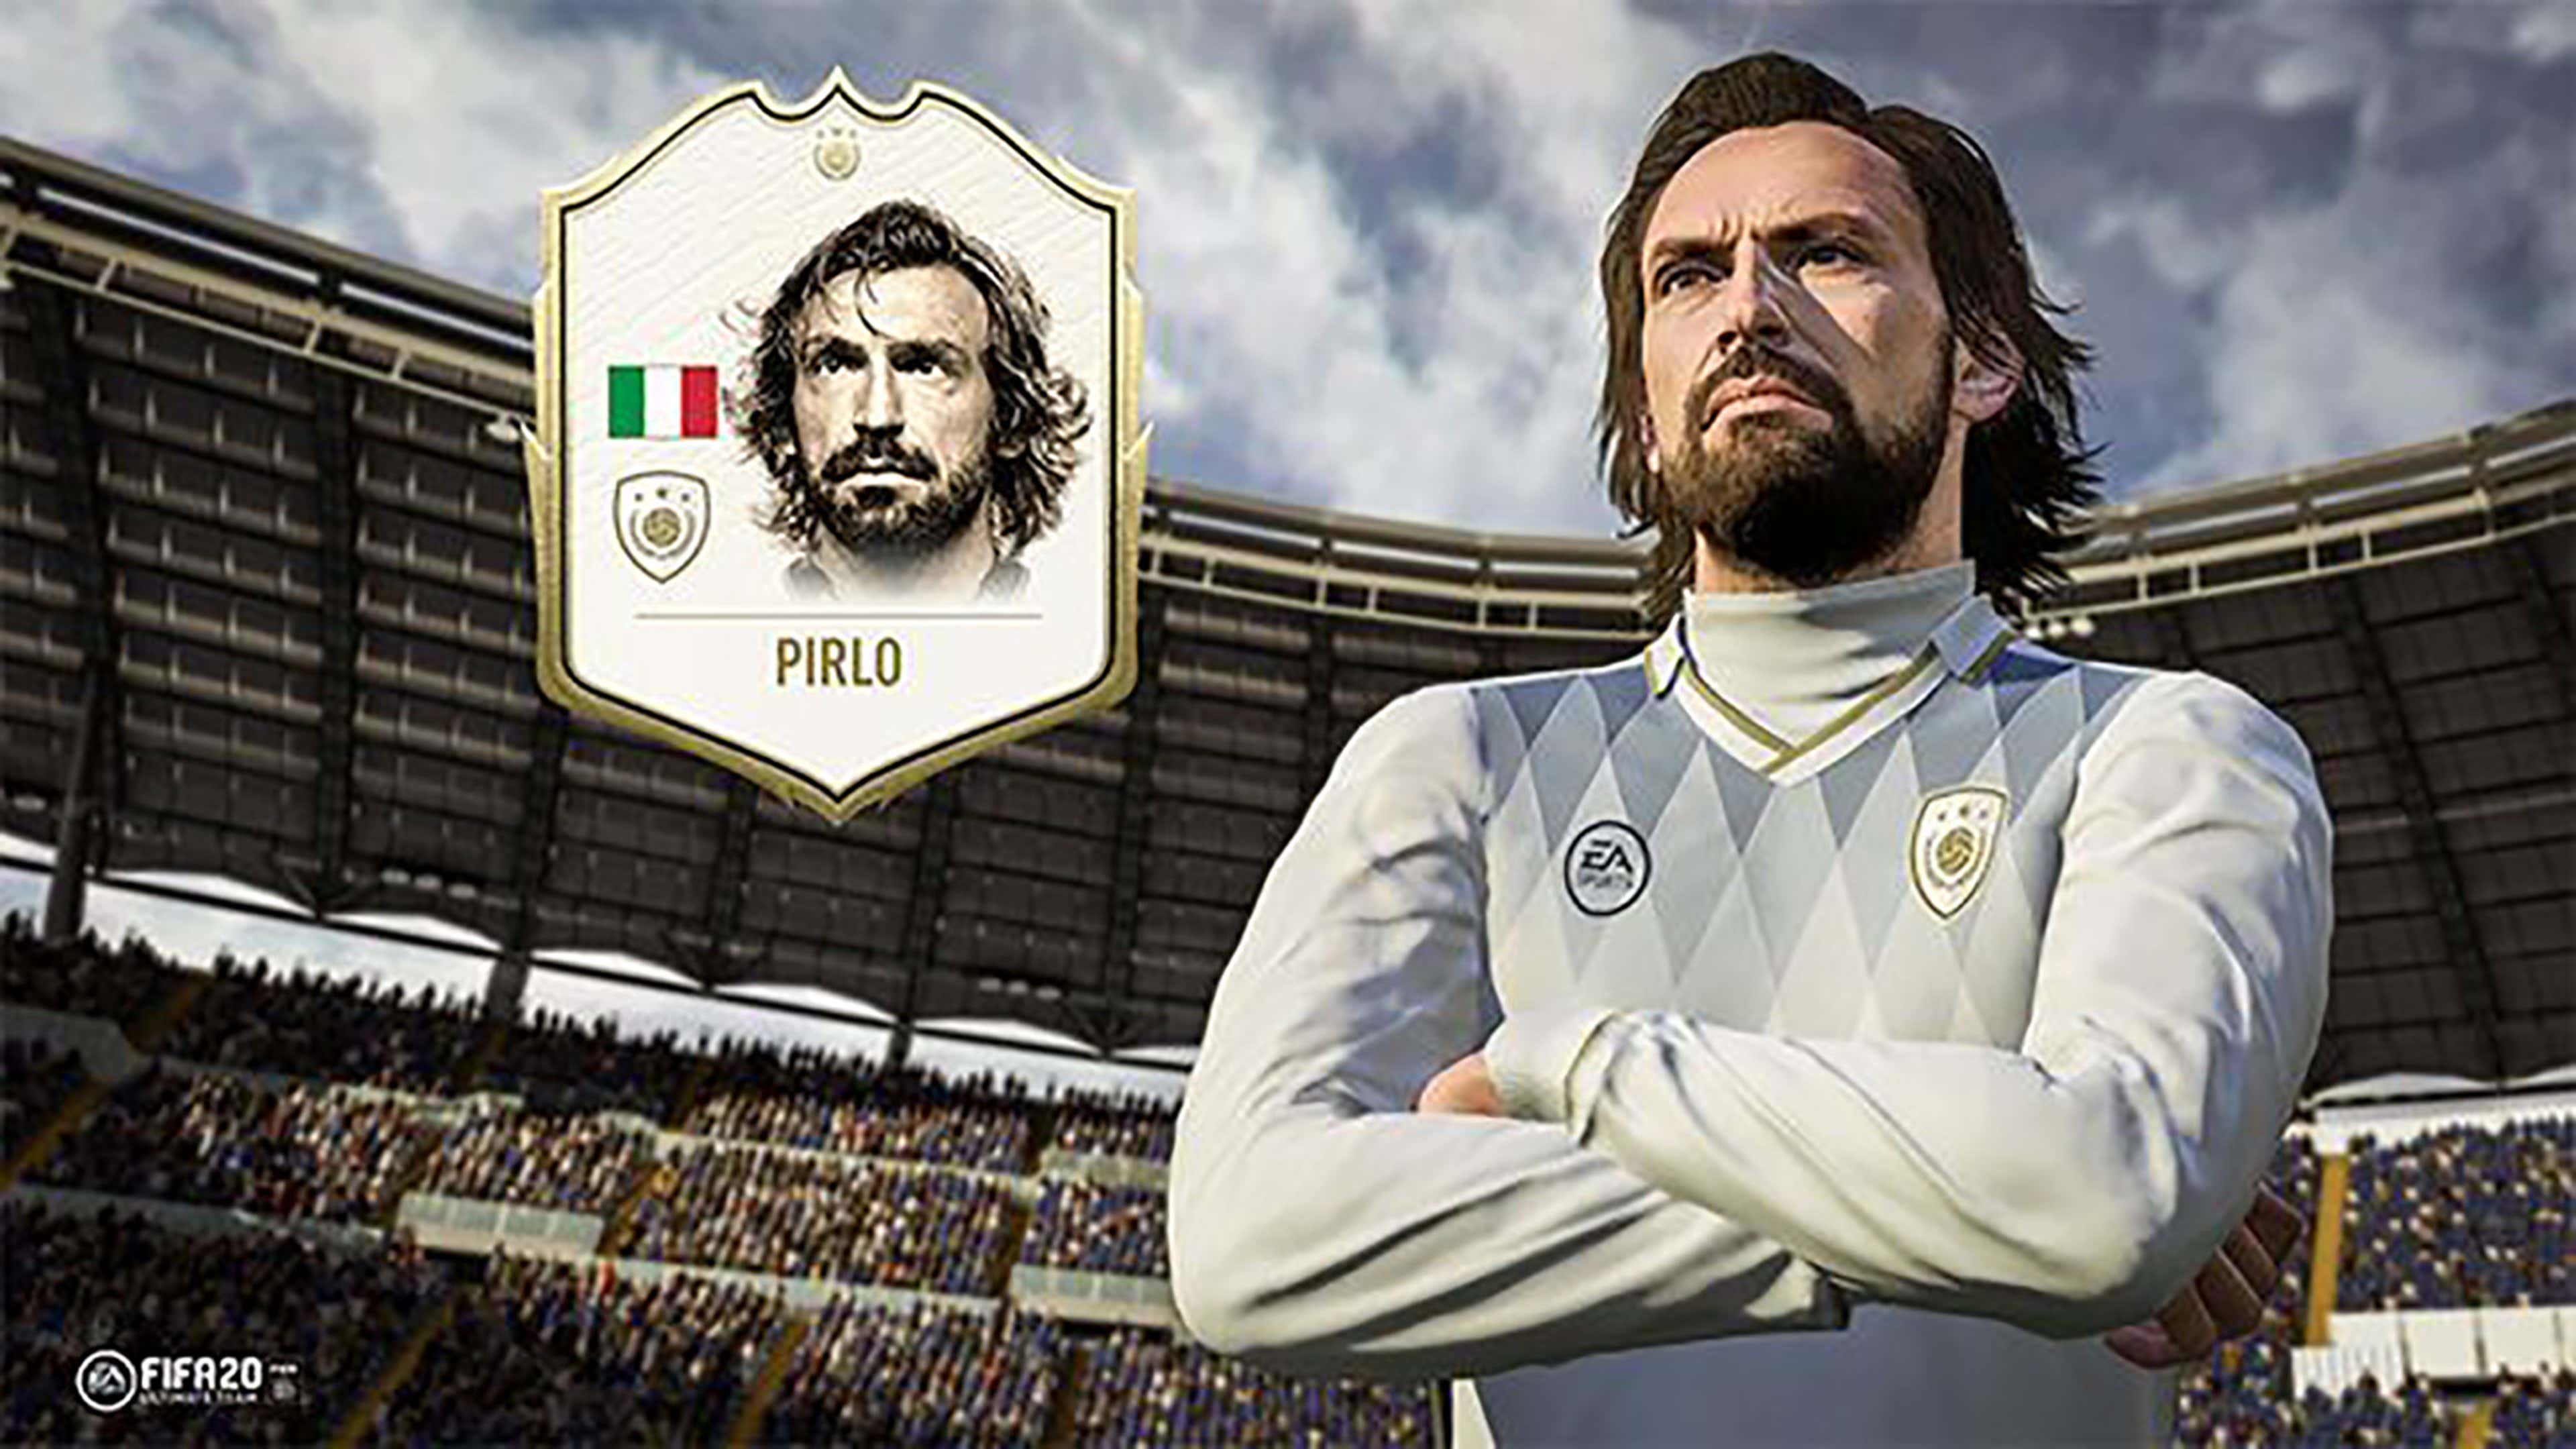 FIFA 18 Icons: Which legends are in the game?